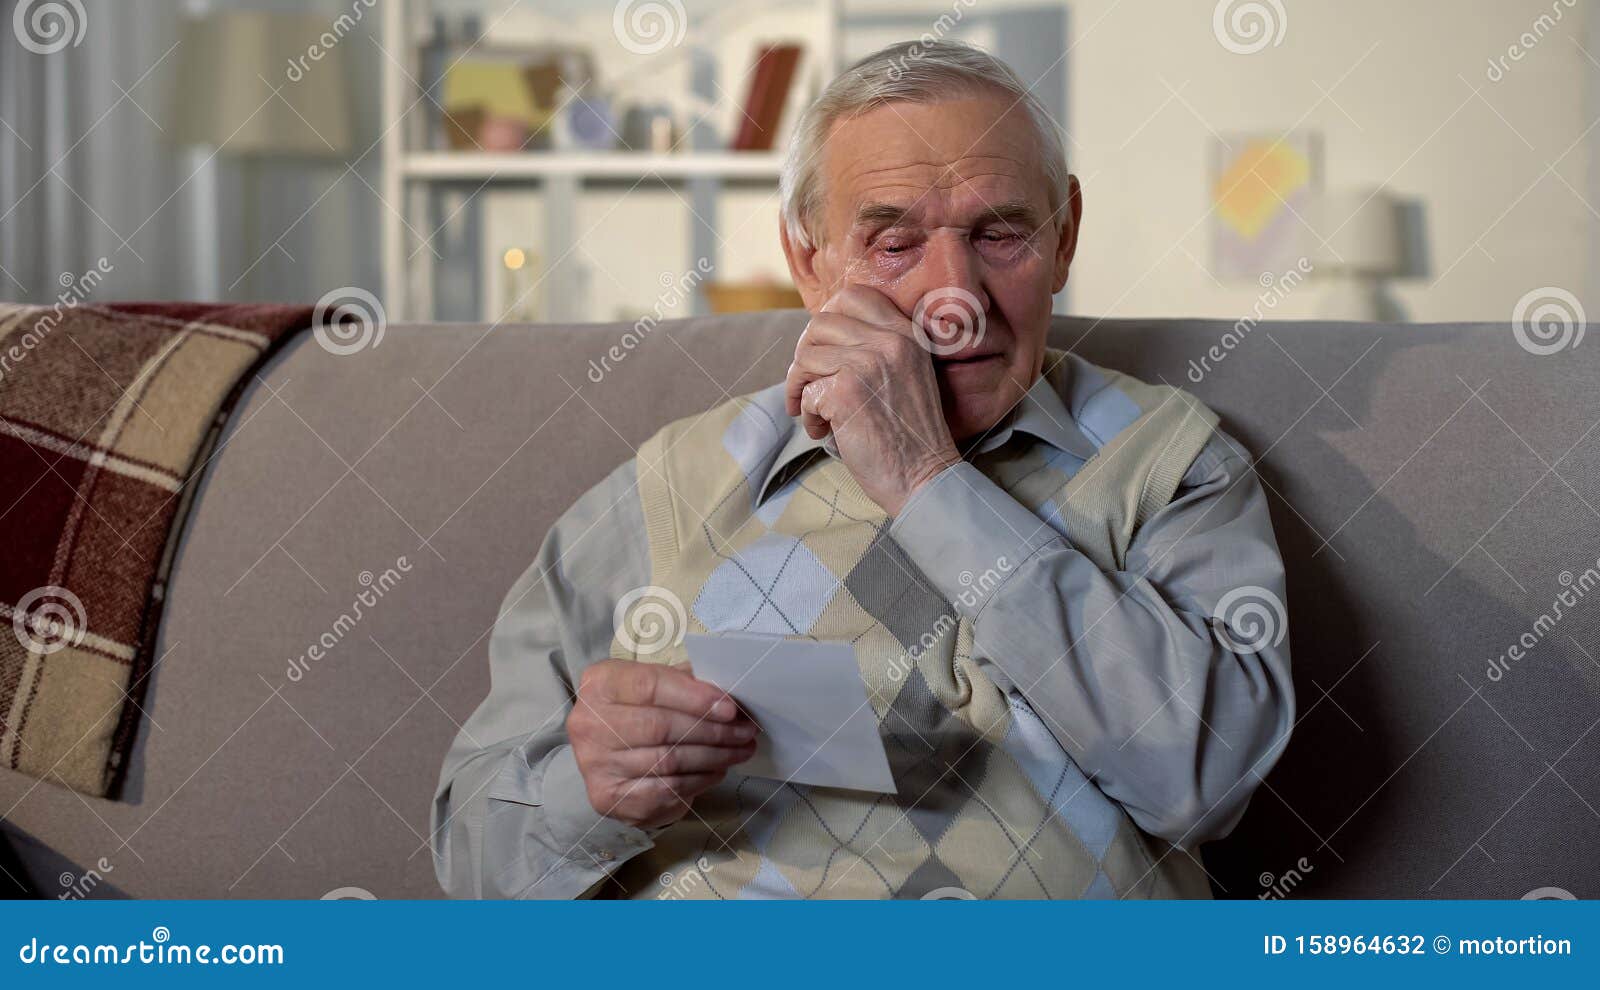 crying elderly man looking at photo, remembering old lost friend, memories